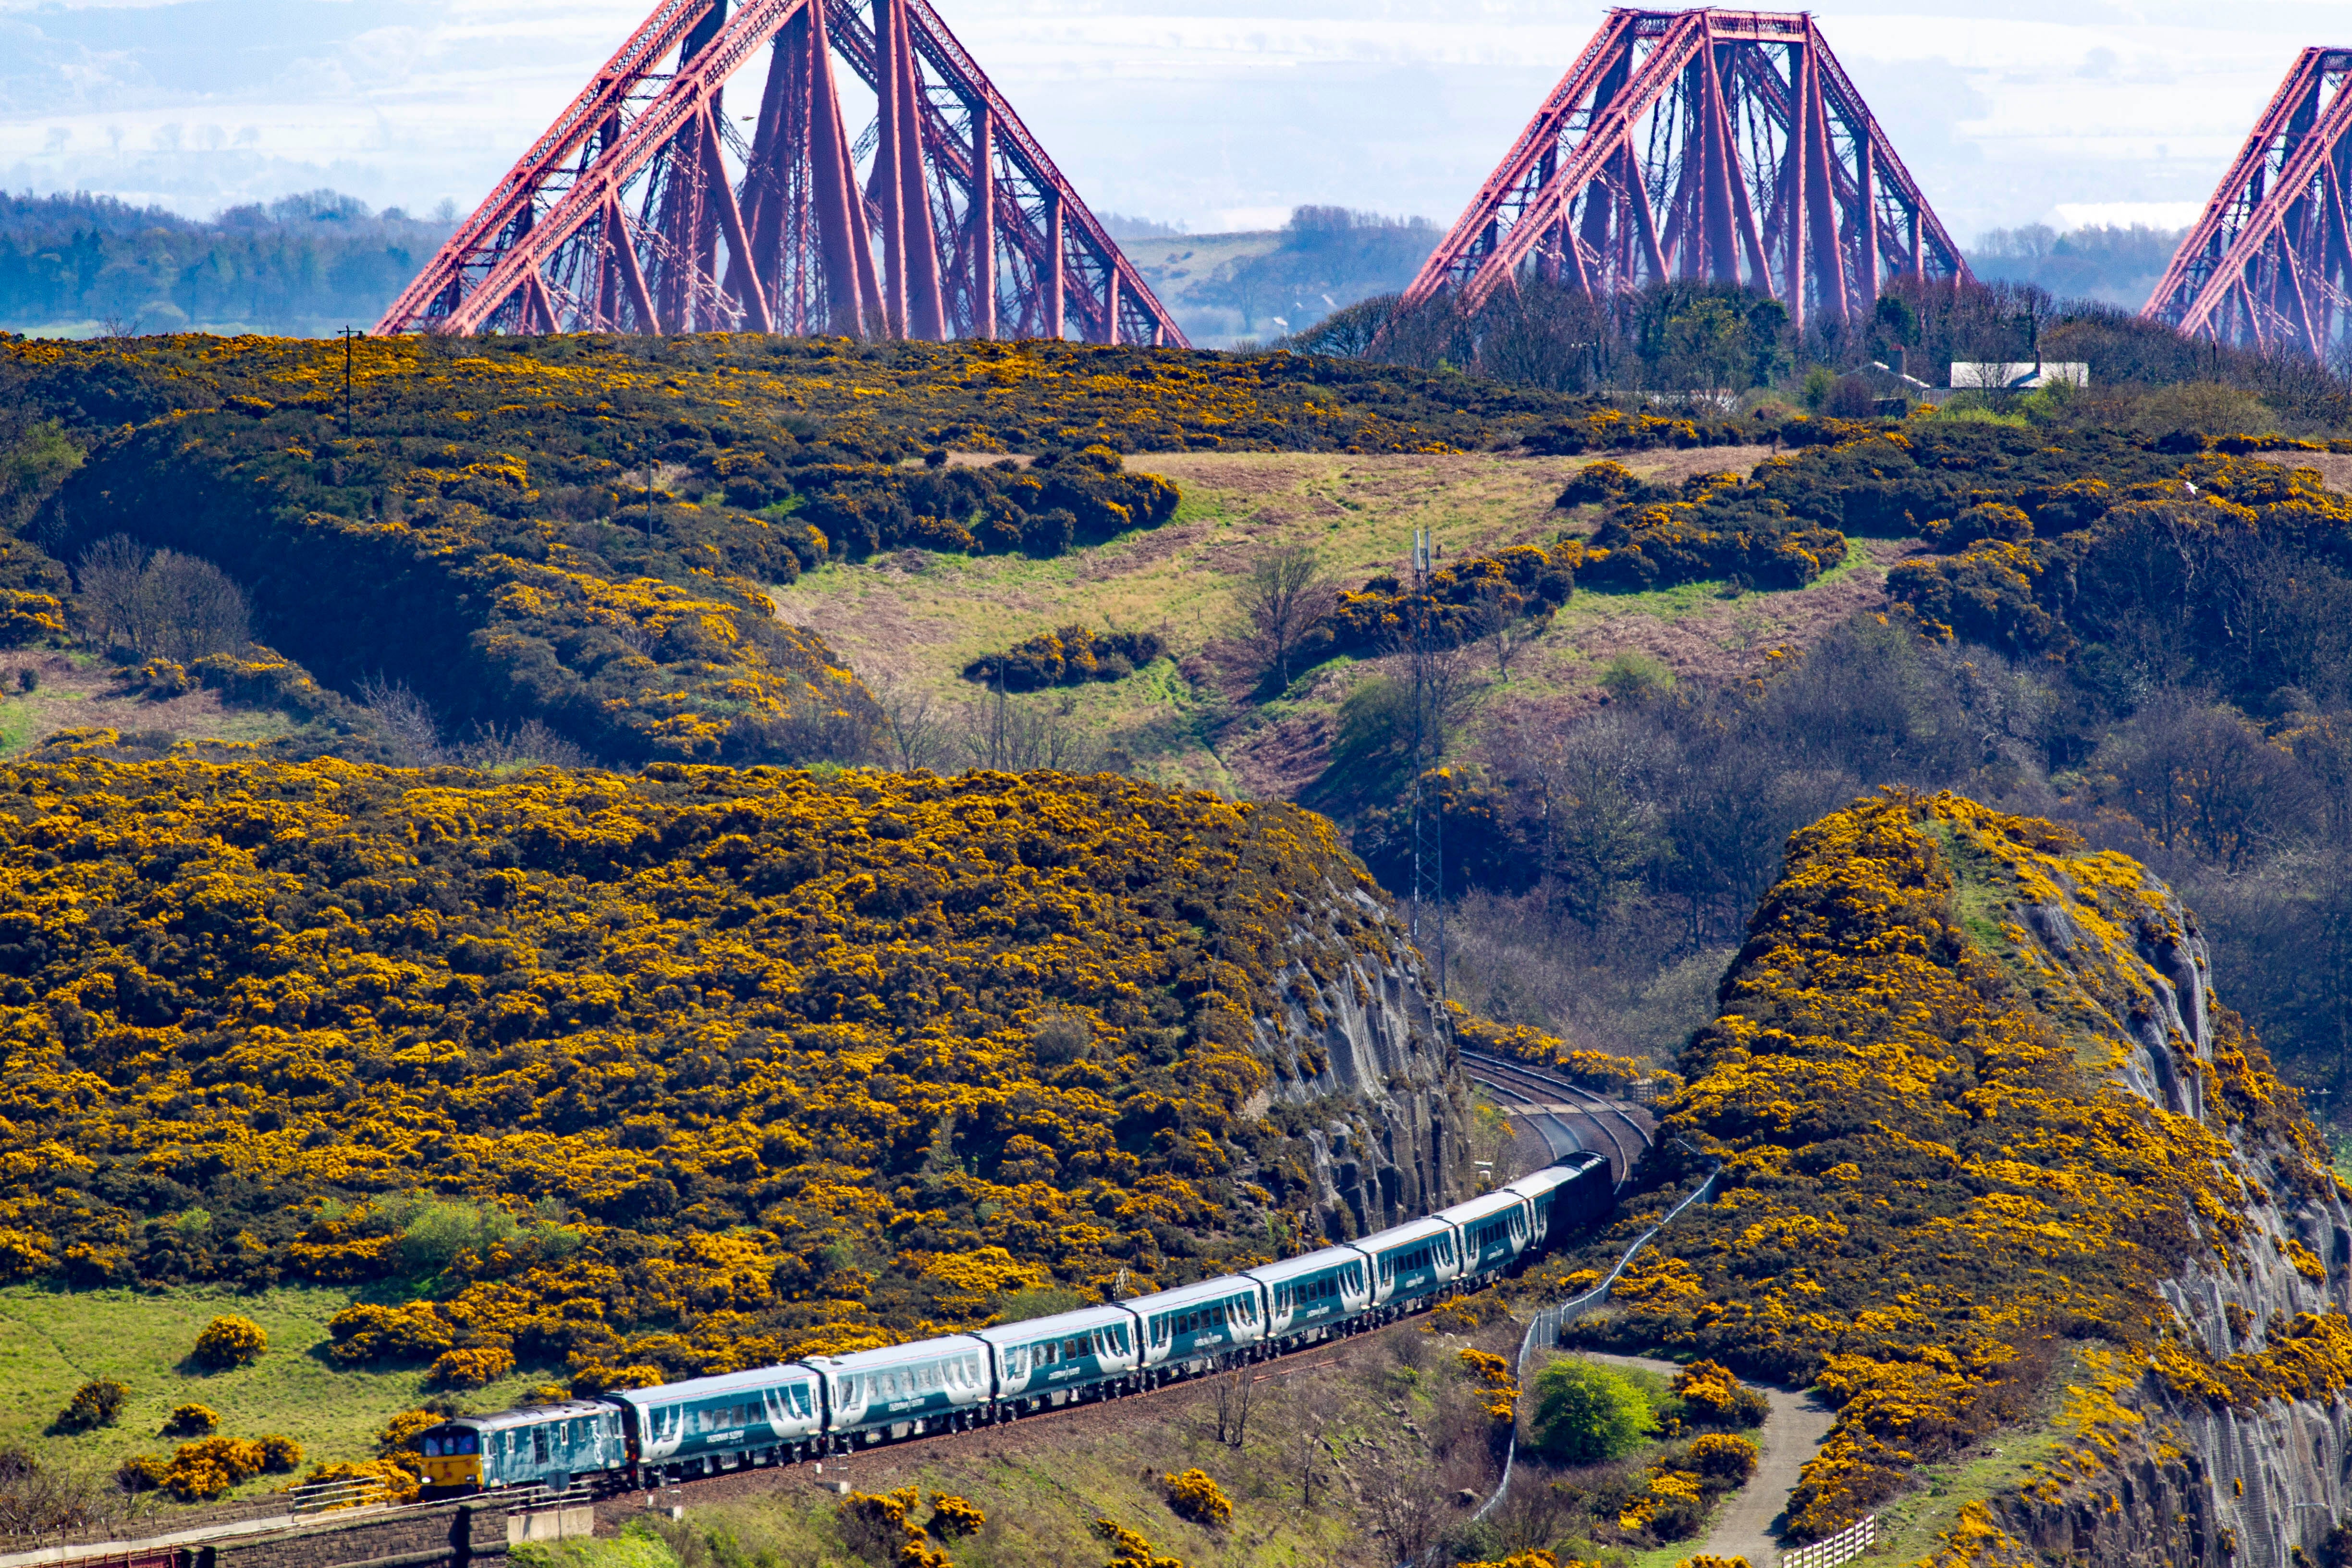 Take the sleeper from London to Scotland for legendary landscapes and double beds